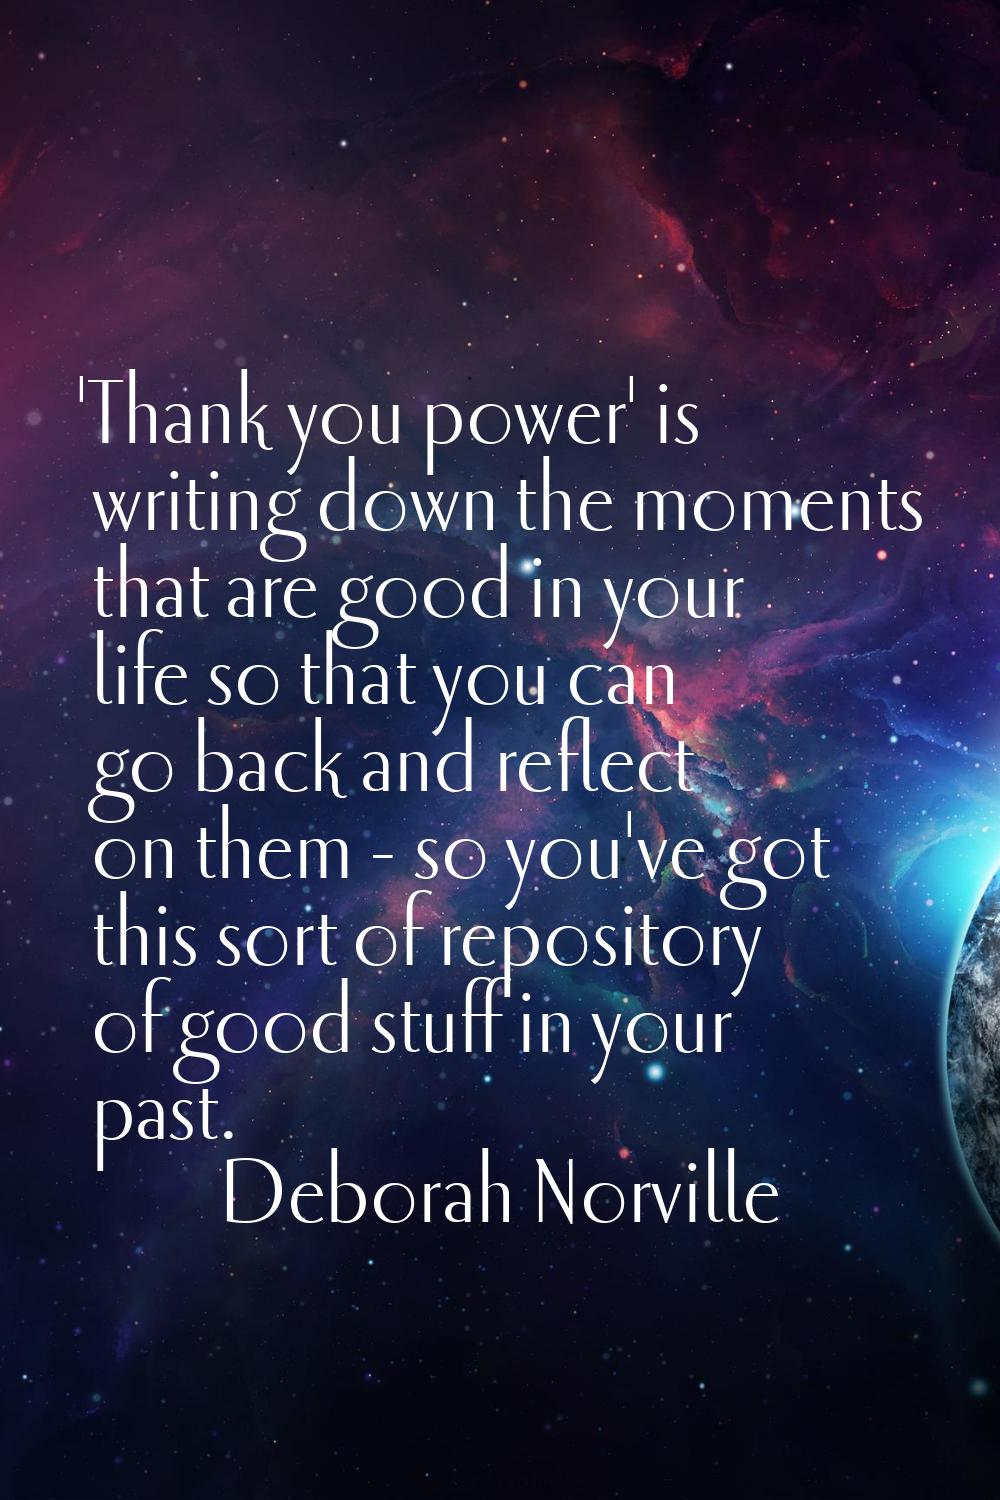 'Thank you power' is writing down the moments that are good in your life so that you can go back an